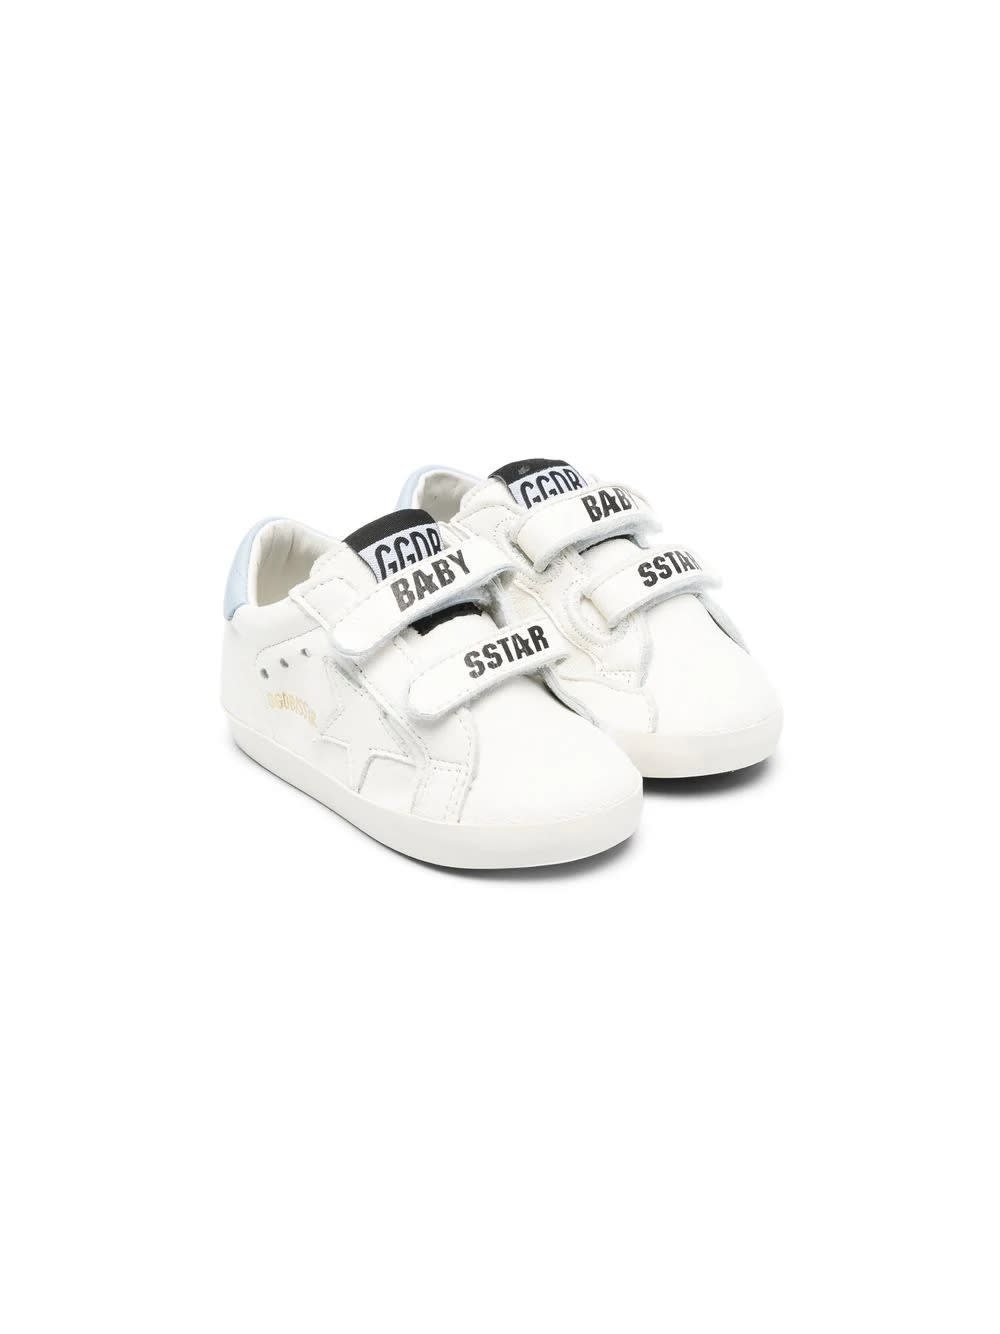 Golden Goose Kids' Sneaker Set With Print In White